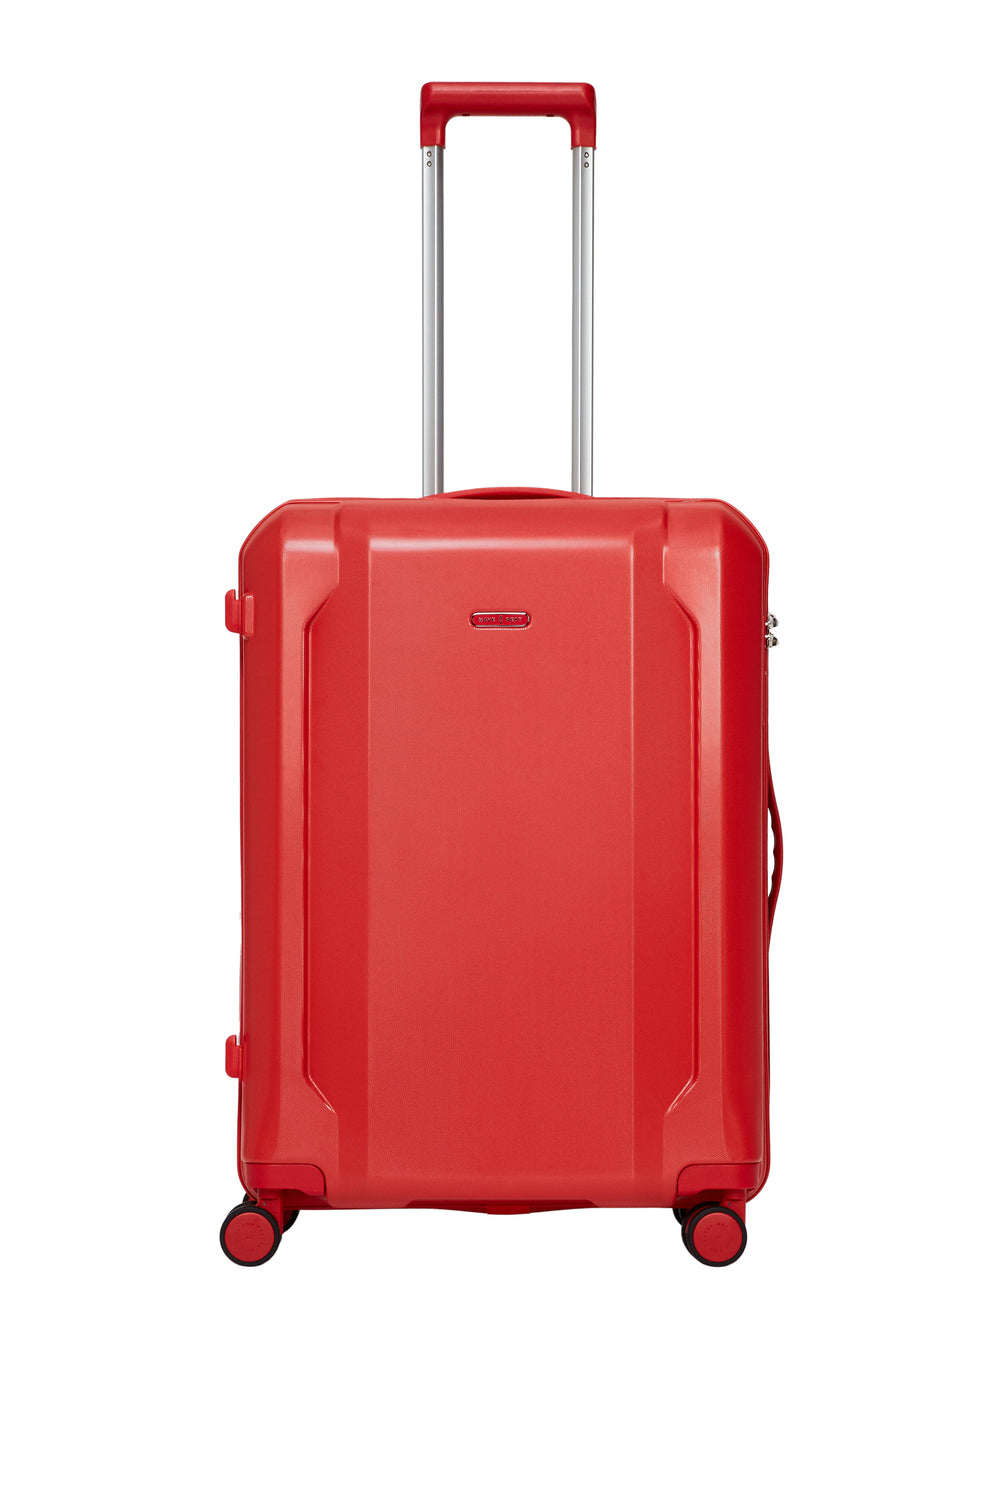 Smart suitcase Medium size Red Kiss HAVE A REST